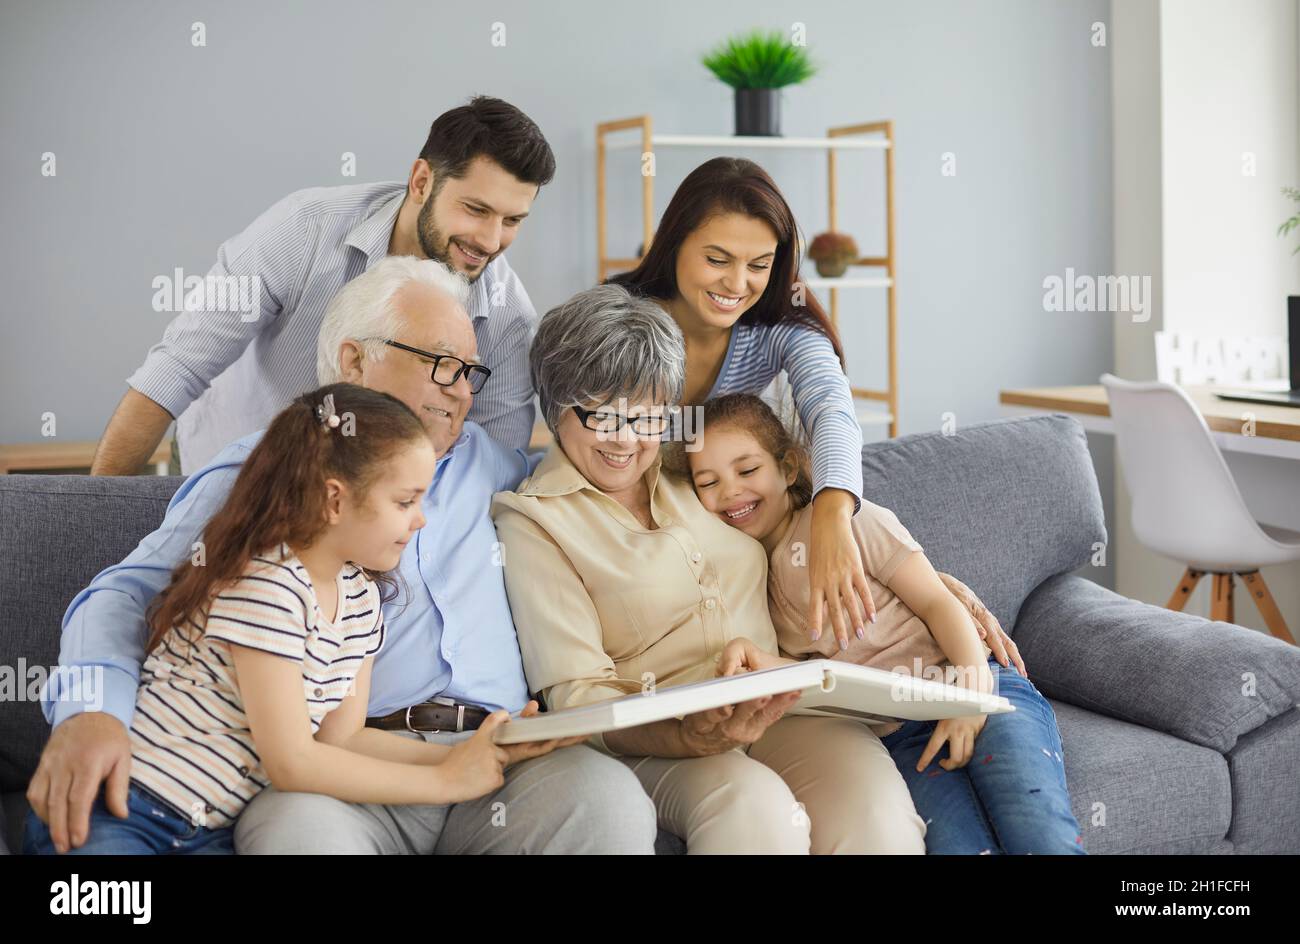 Happy family grandparents with twin granddaughters and their parents browse the family photo album. Stock Photo